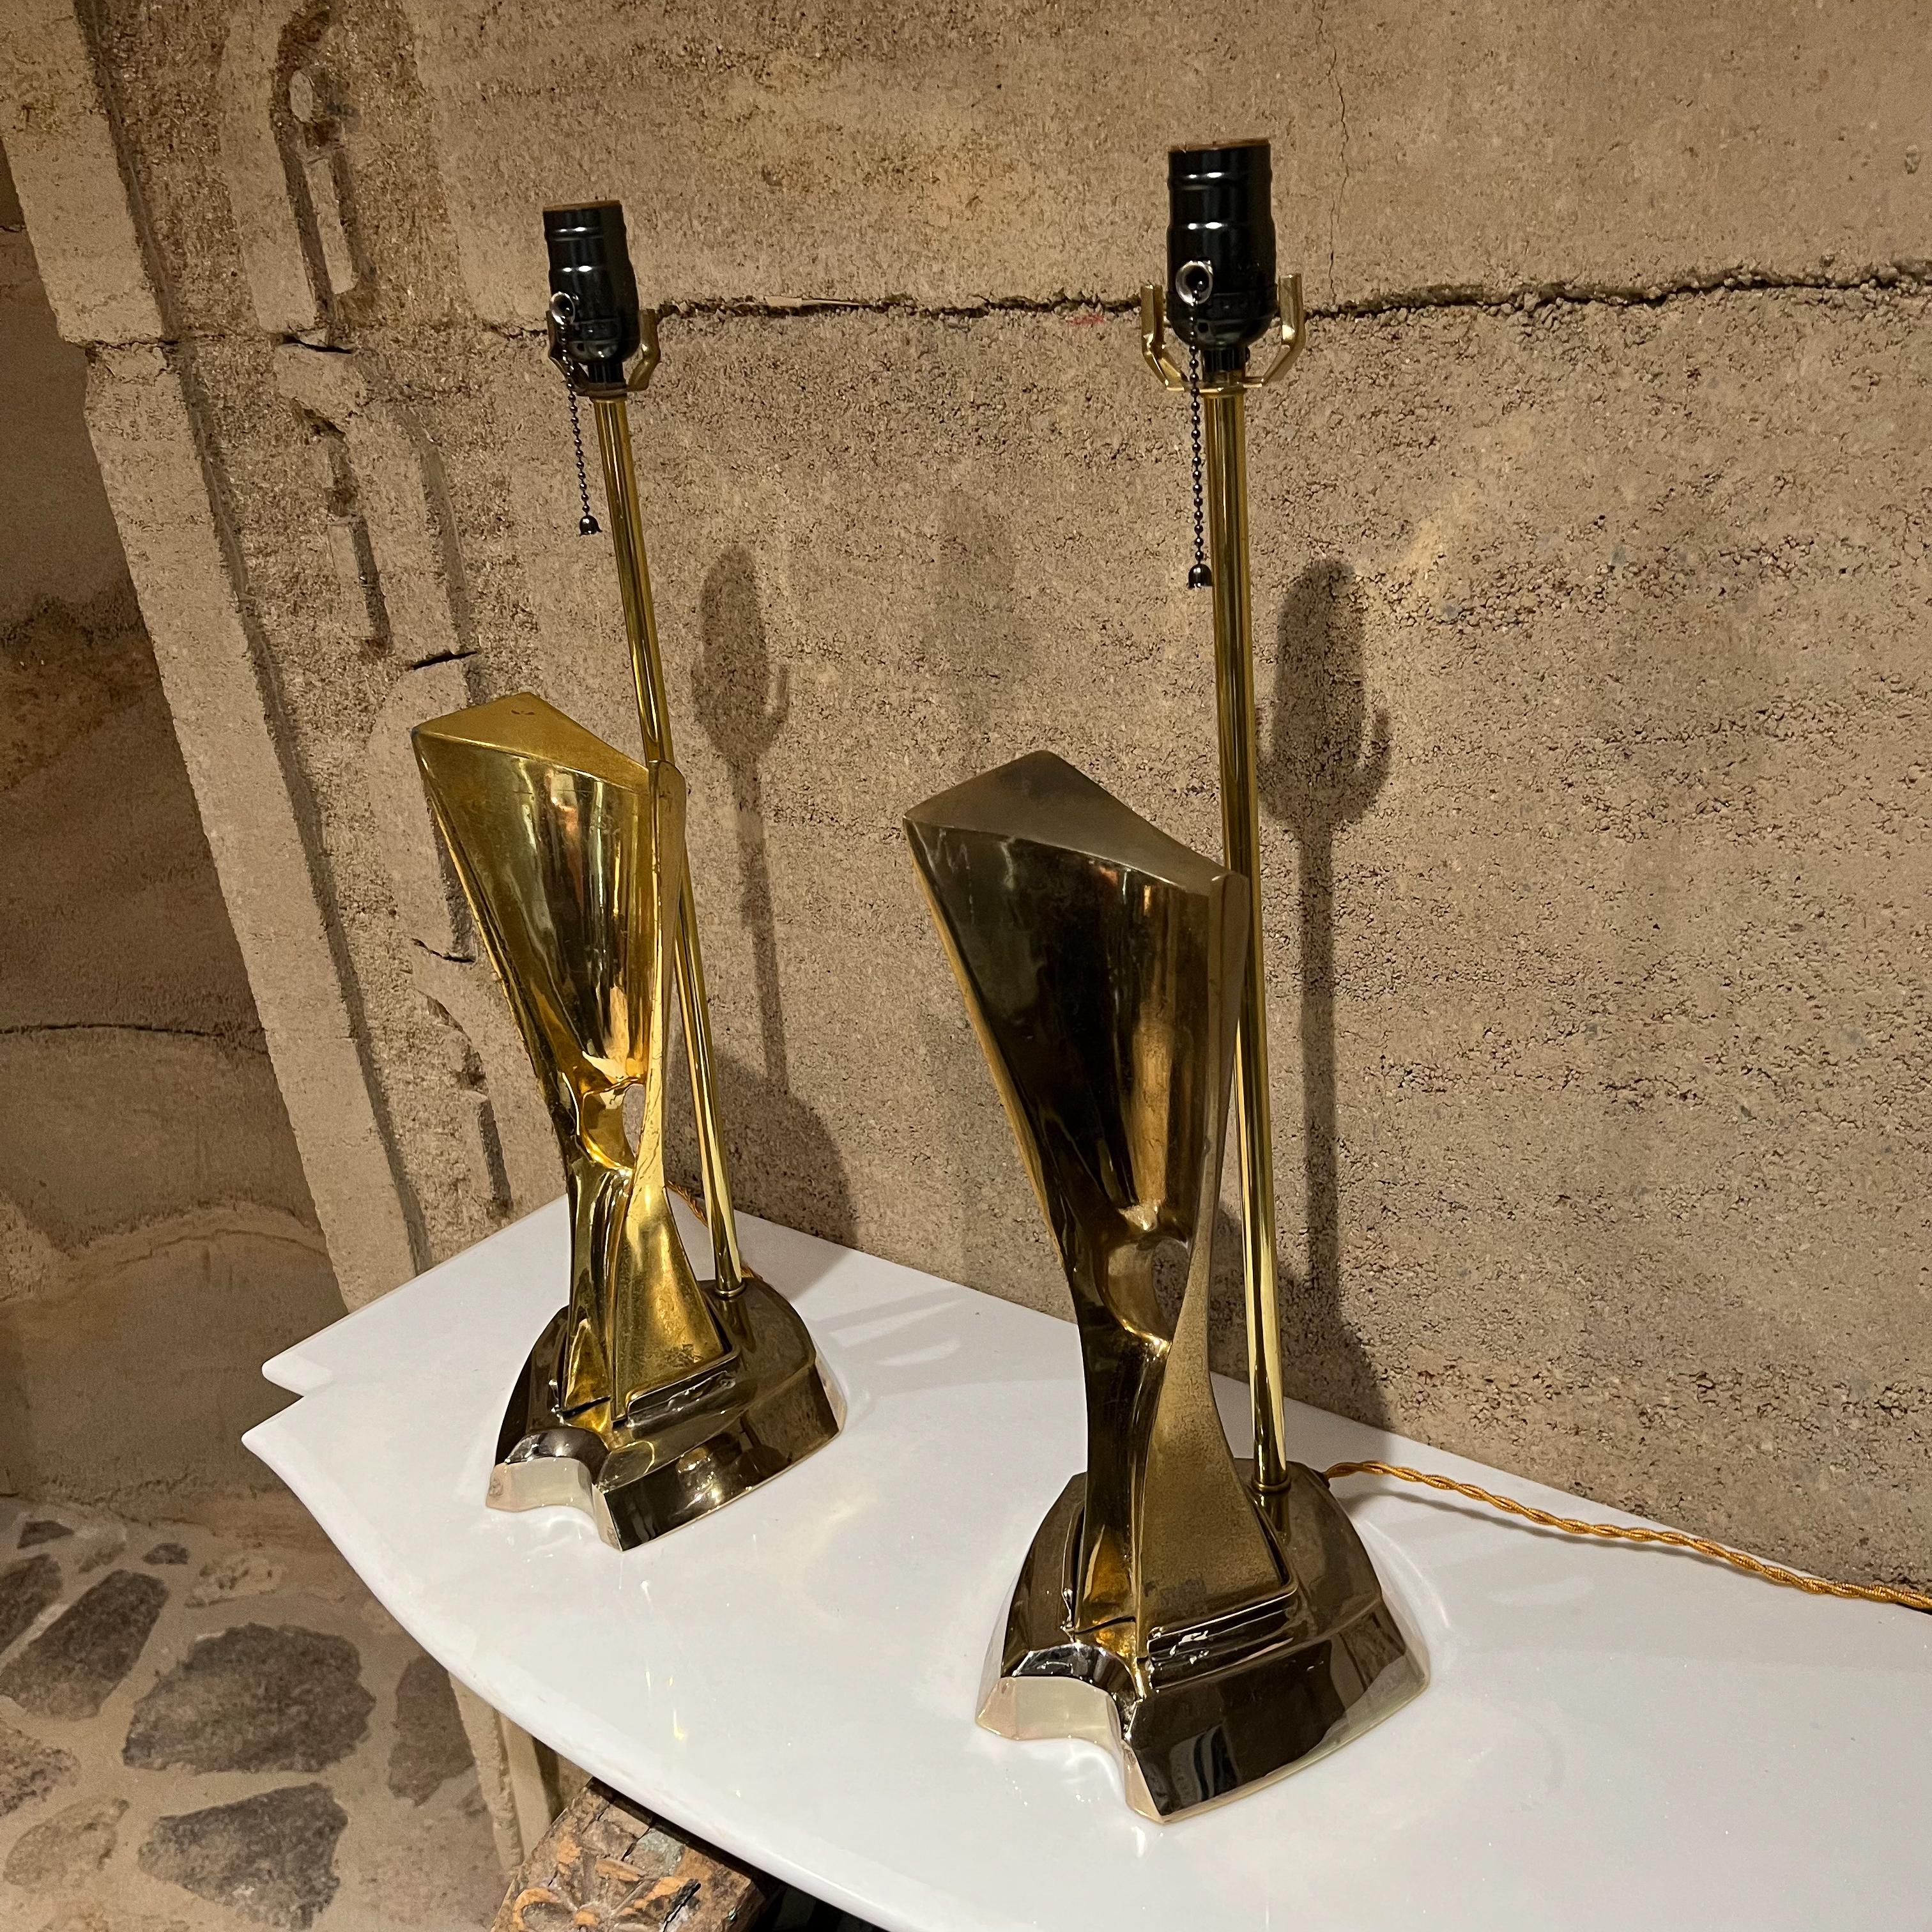 1980s Sculptural Pair of Table Lamps Brutalist Art Sculpture in Patinated Brass For Sale 10